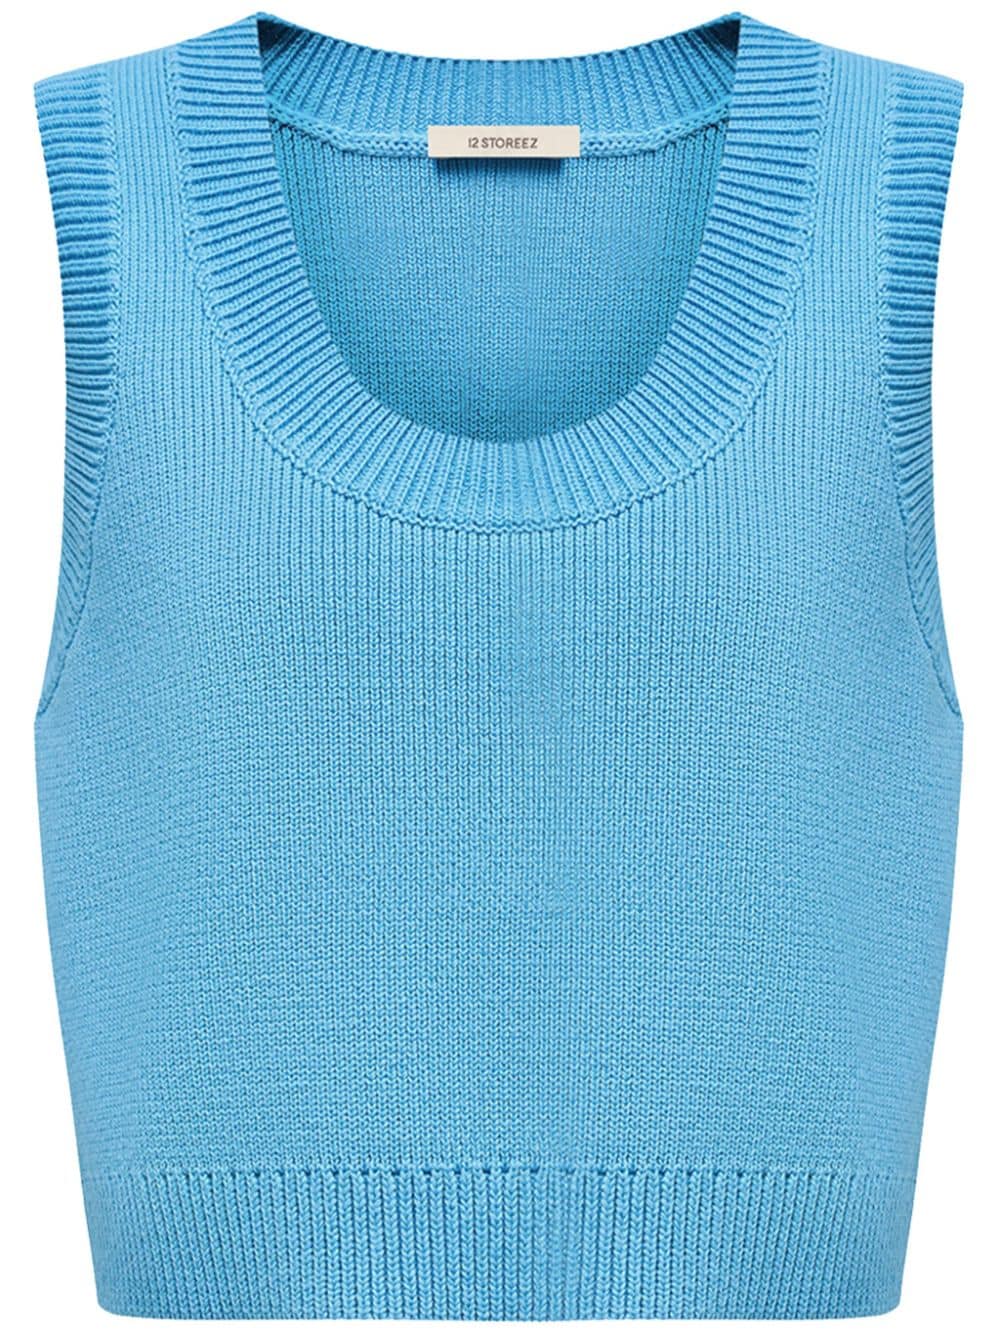 12 Storeez Knitted Cotton Cropped Top In Blue